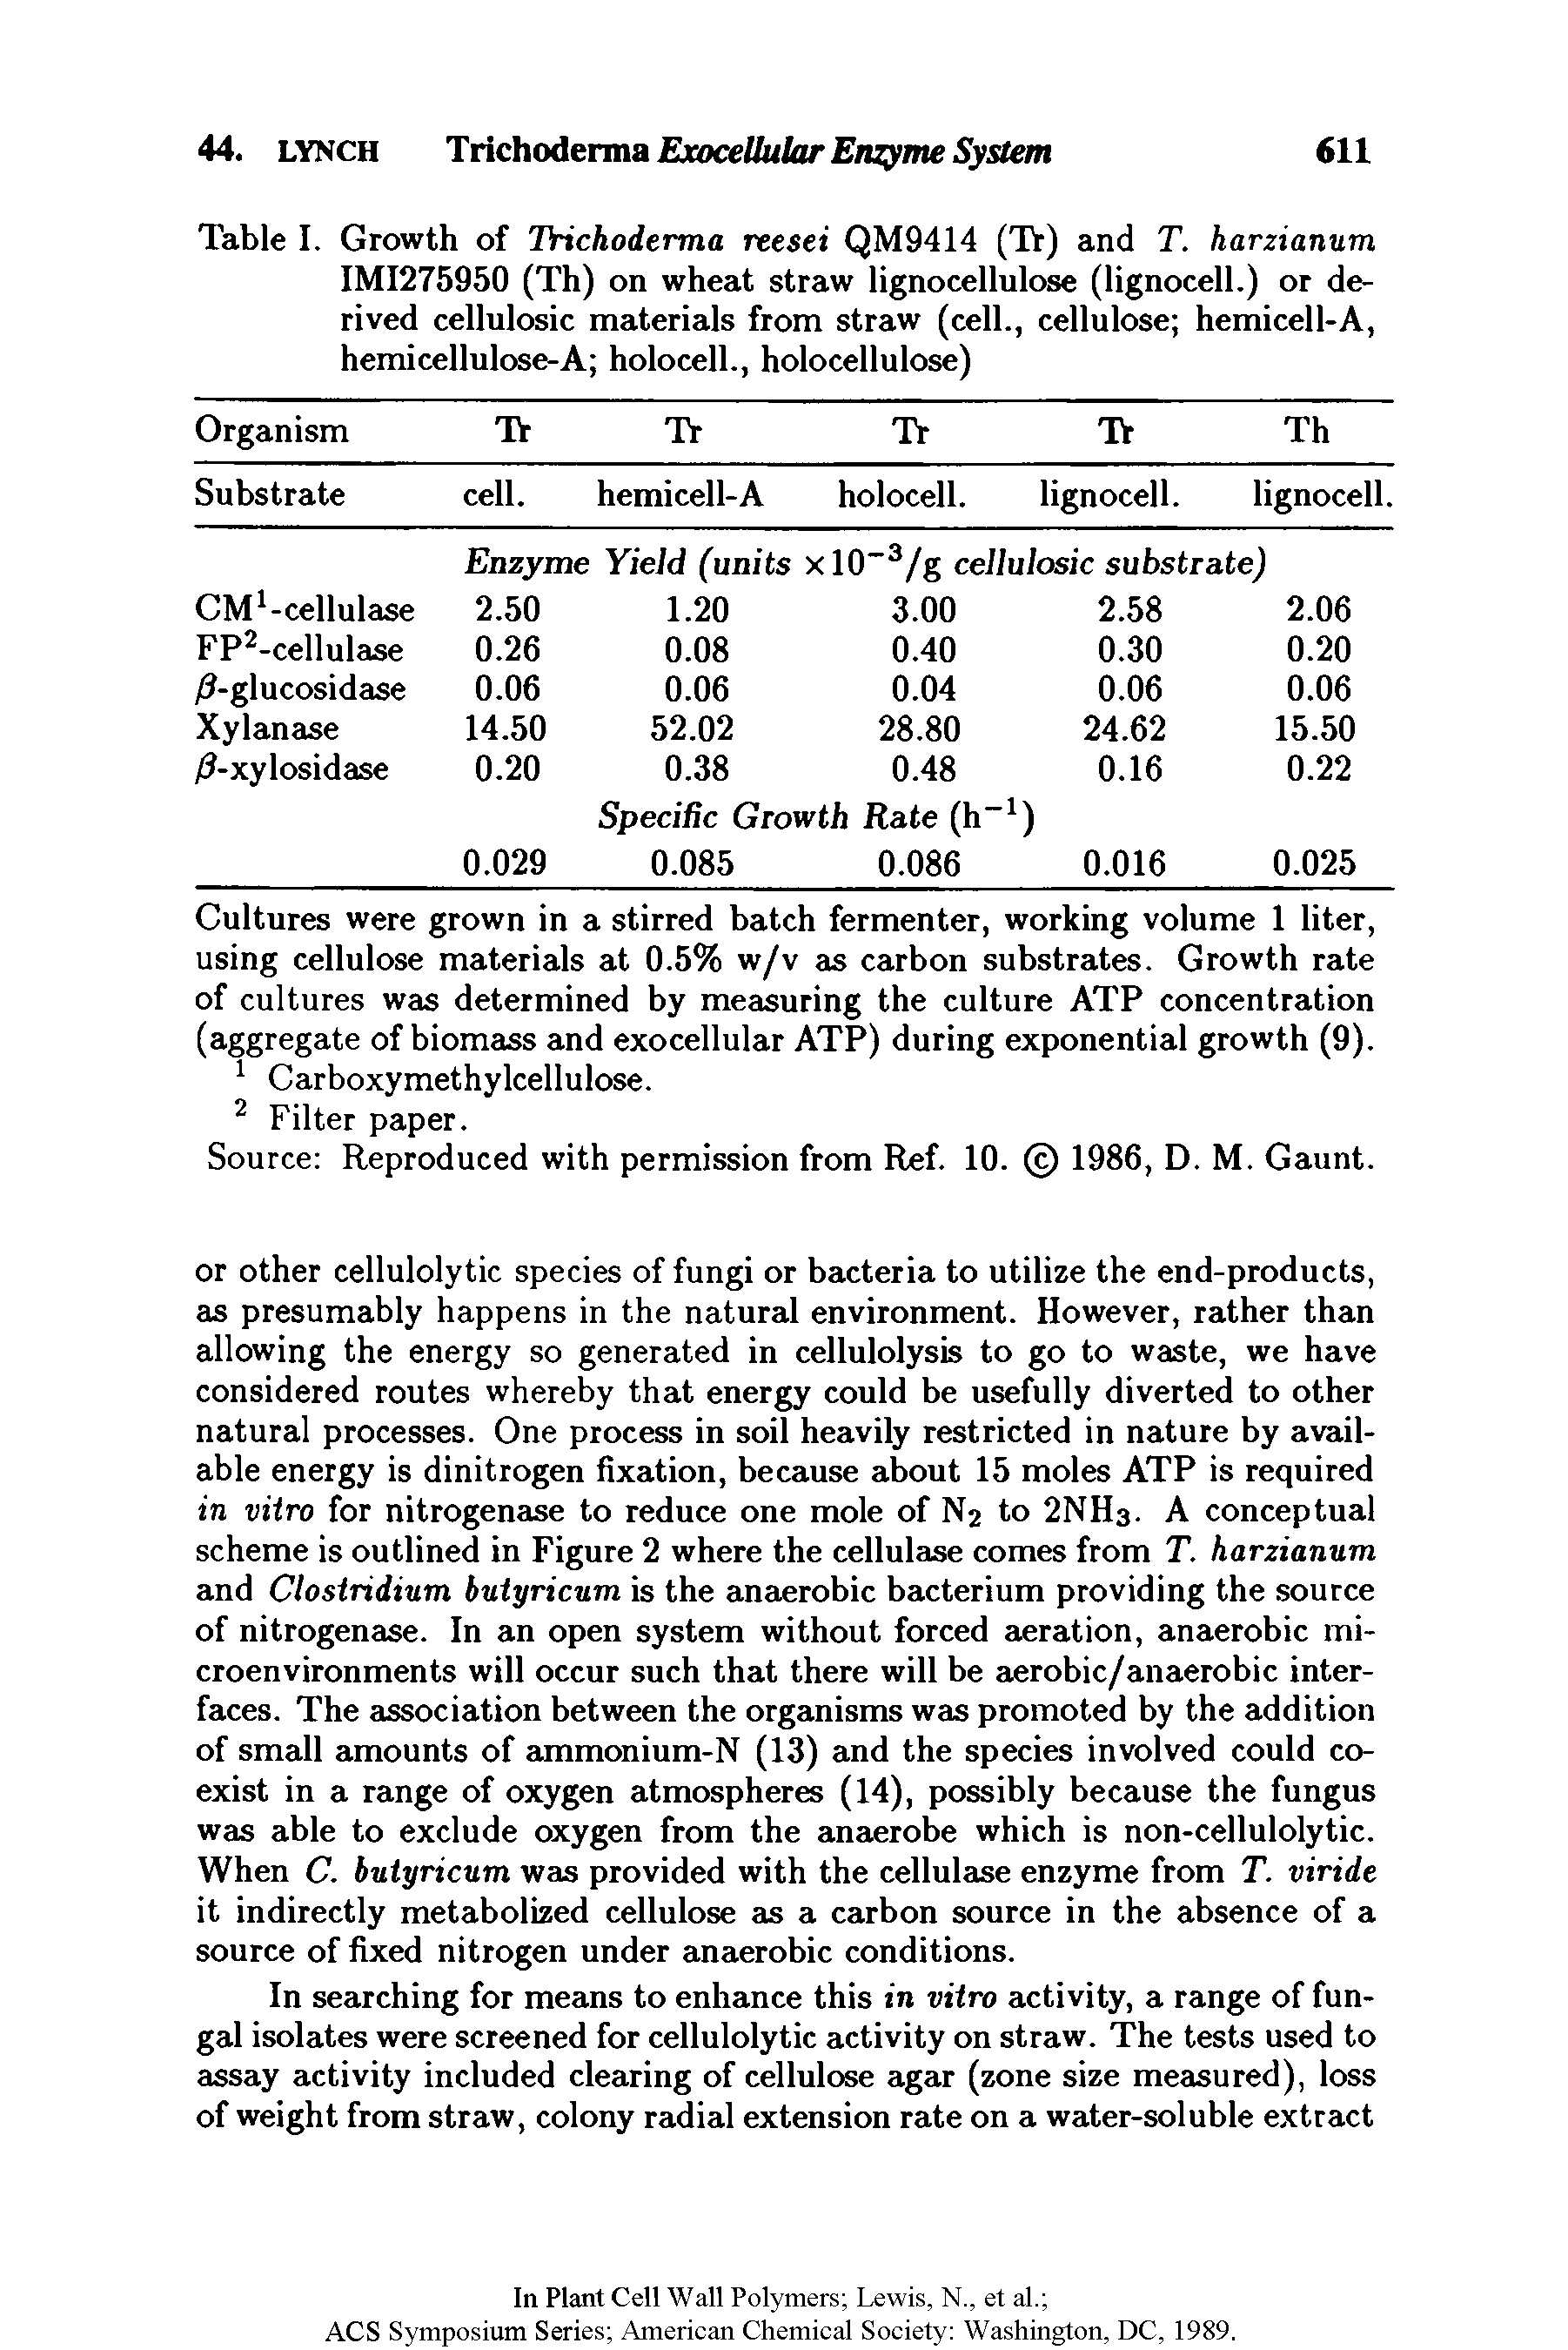 Table I. Growth of Trichoderma reesei QM9414 (Tr) and T. harzianum IMI275950 (Th) on wheat straw lignocellulose (lignocell.) or derived cellulosic materials from straw (cell., cellulose hemicell-A, hemicellulose-A holocell., holocellulose)...